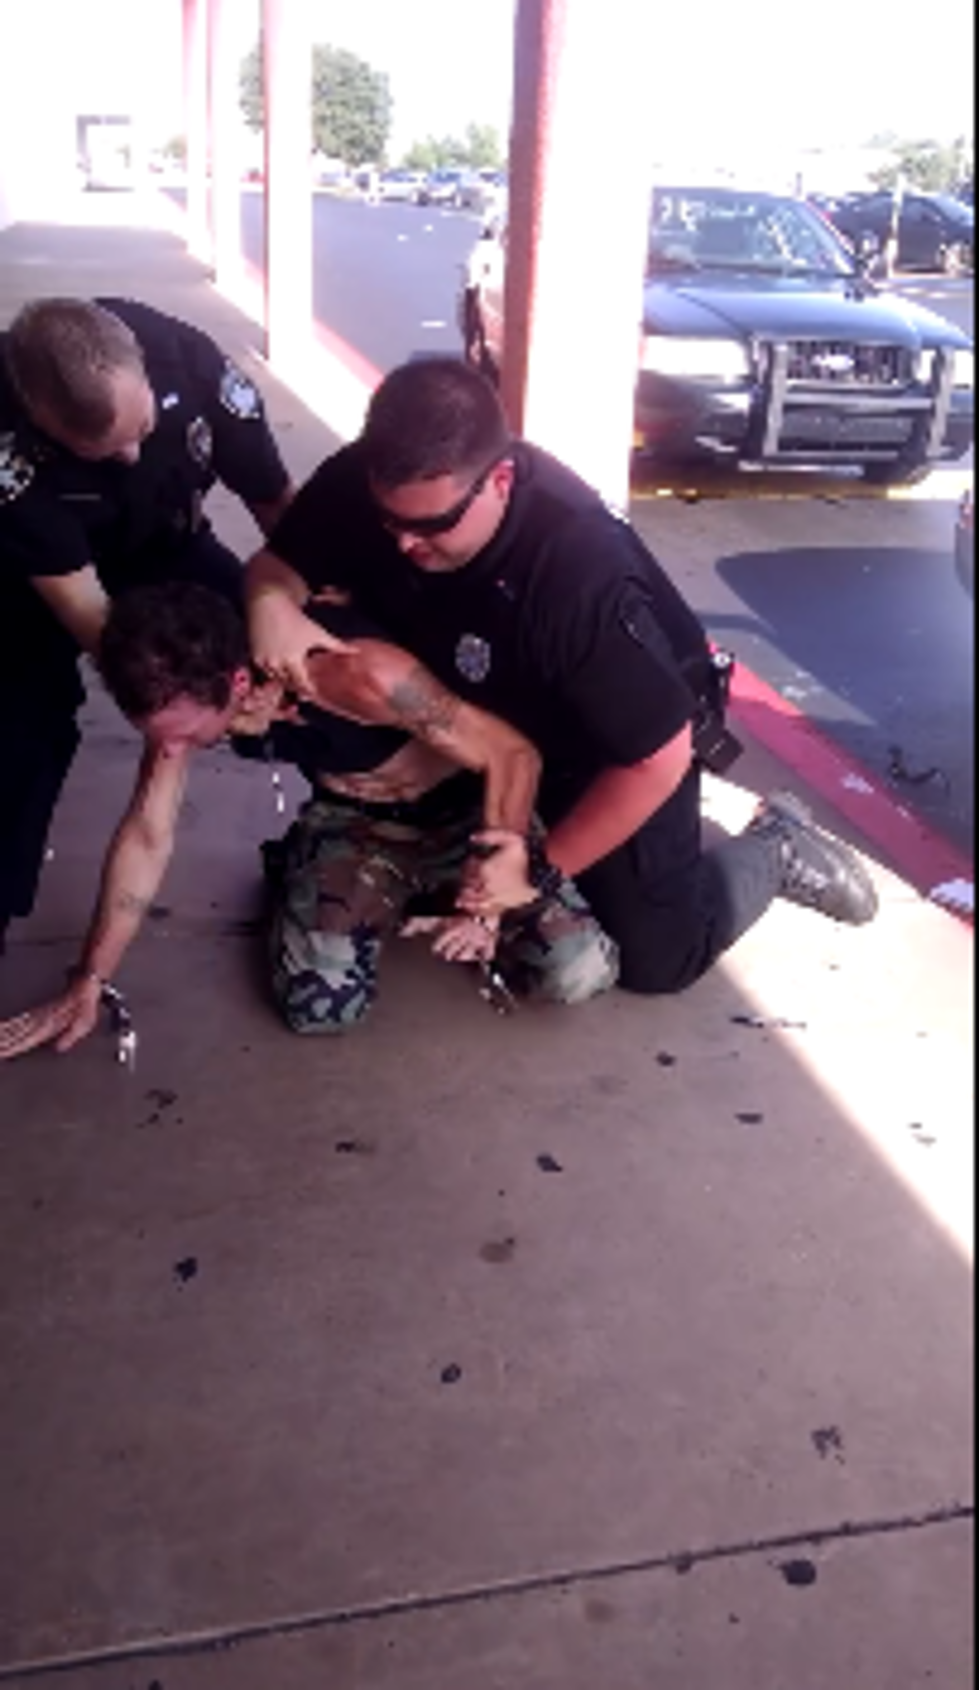 Controversial Arrest By The Bossier City Police Department? [Video]